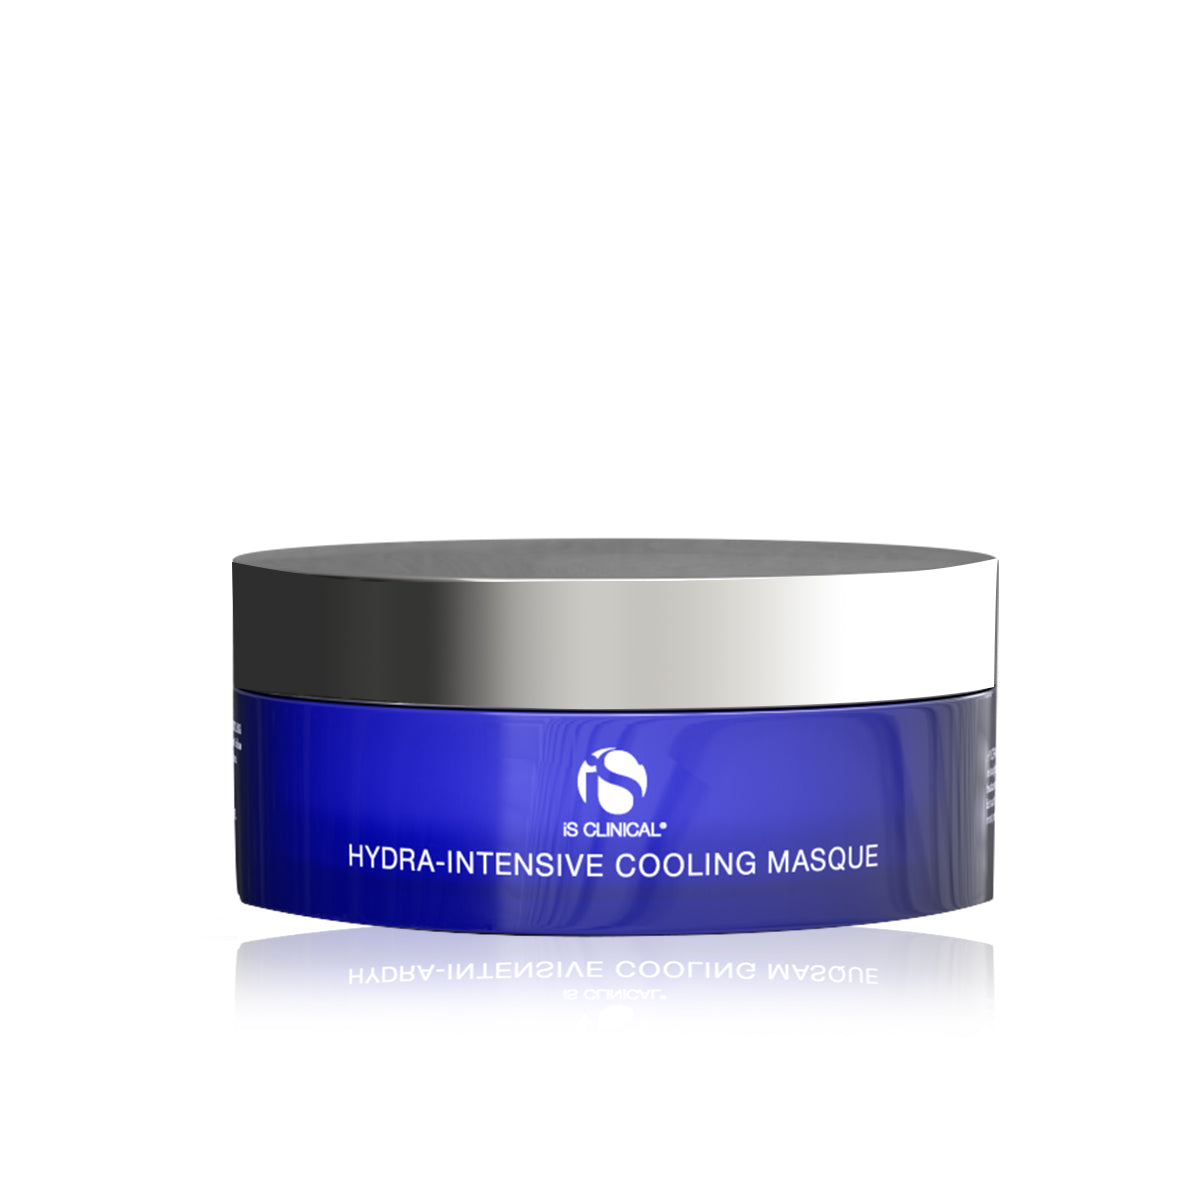 IS CLINICAL 特效冰感補濕面膜 | Hydra-Intensive Cooling Masque 120g